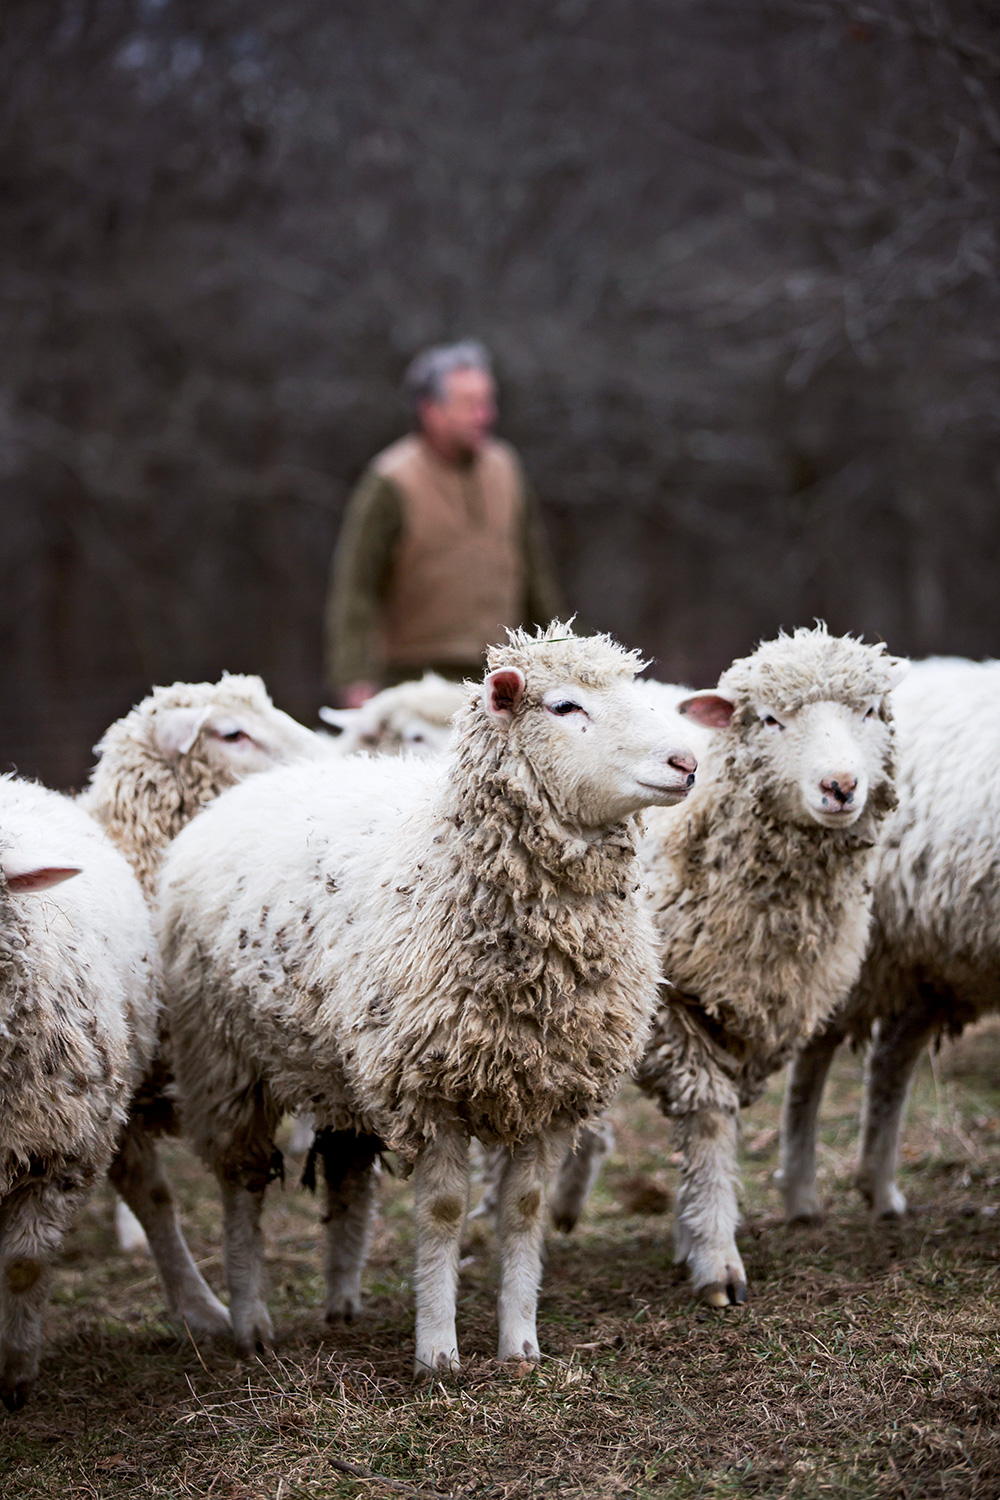 Kristin’s husband, Mark Duprey, tends to their flock of 300 Romney sheep, raised for meat and wool.